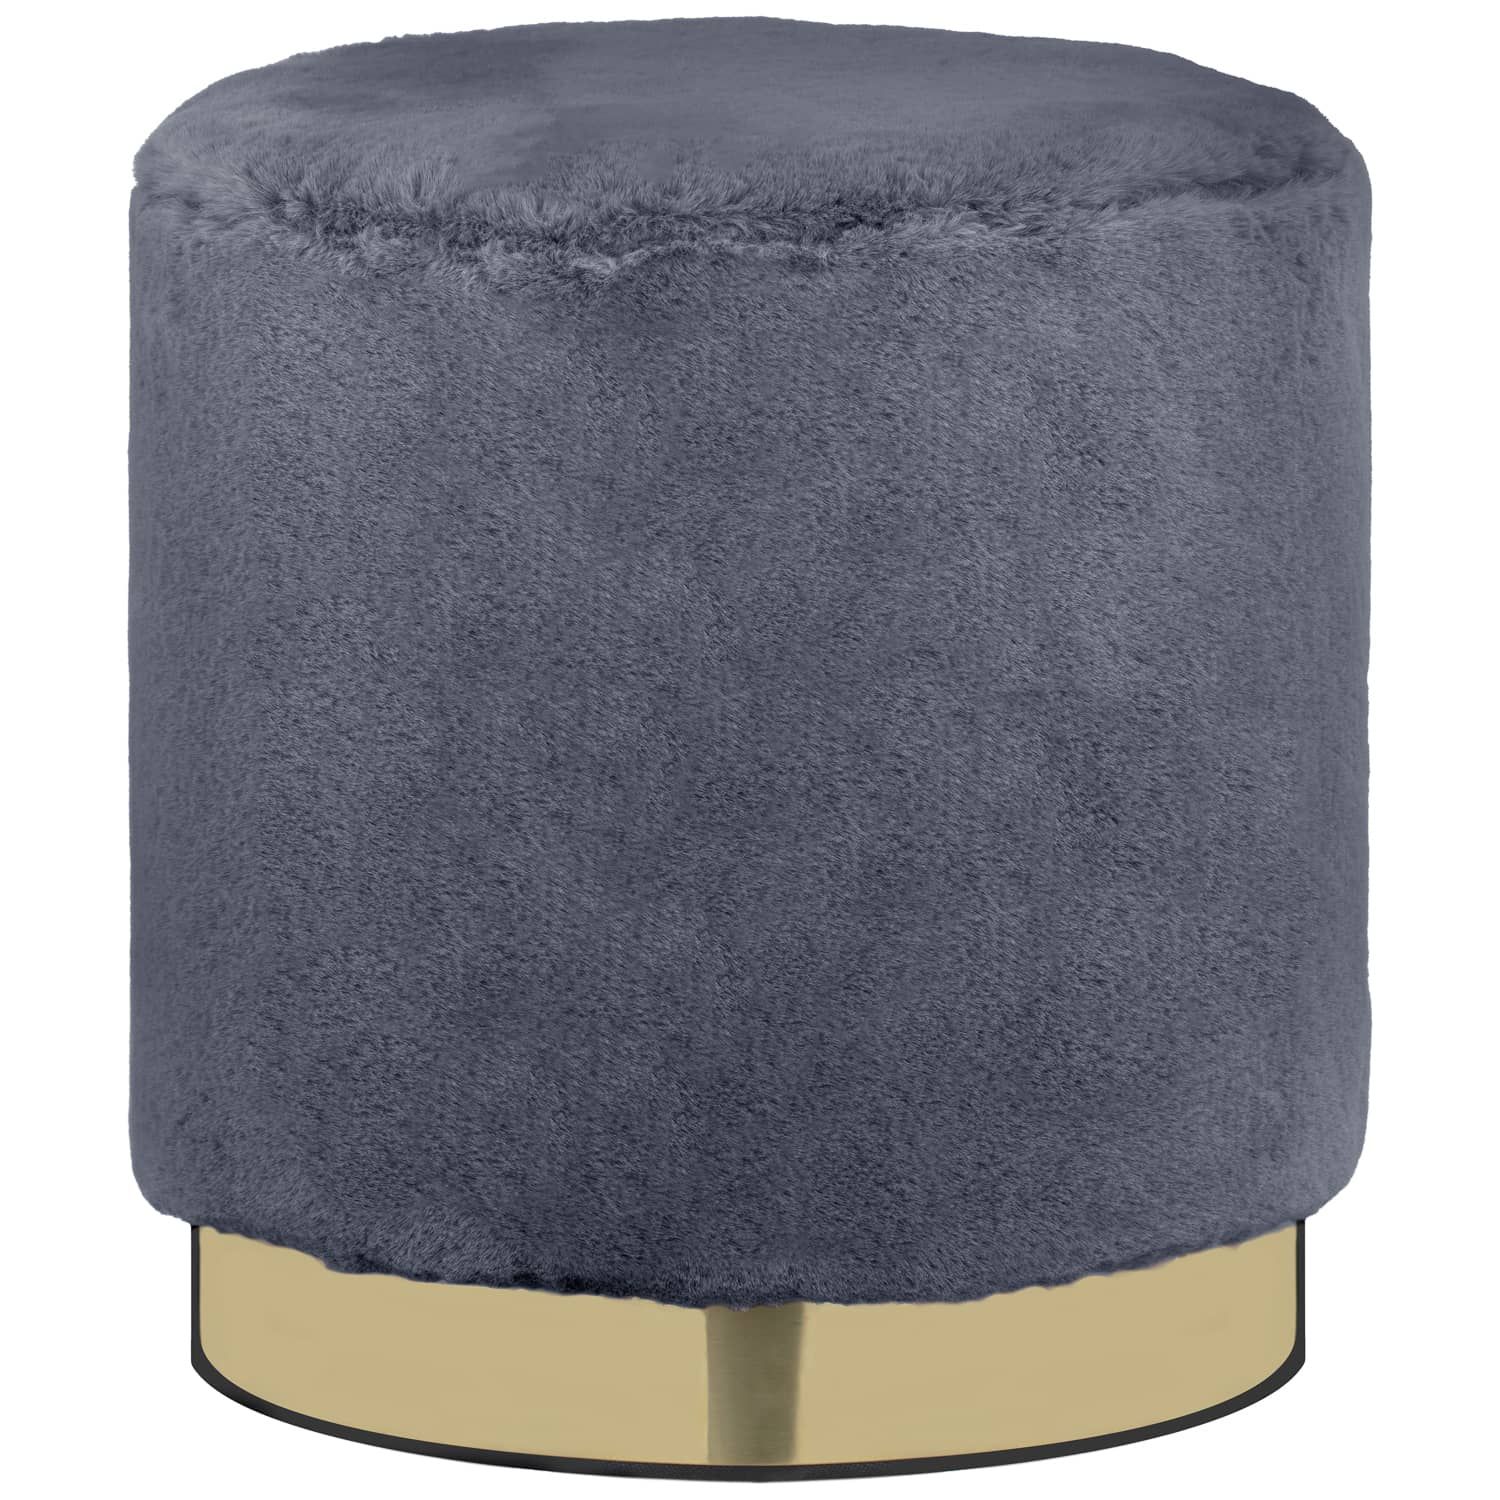 Faux Fur Footstool – Grey | Decorative Accessories – B&m Inside White Faux Fur Round Accent Stools With Storage (Gallery 19 of 20)